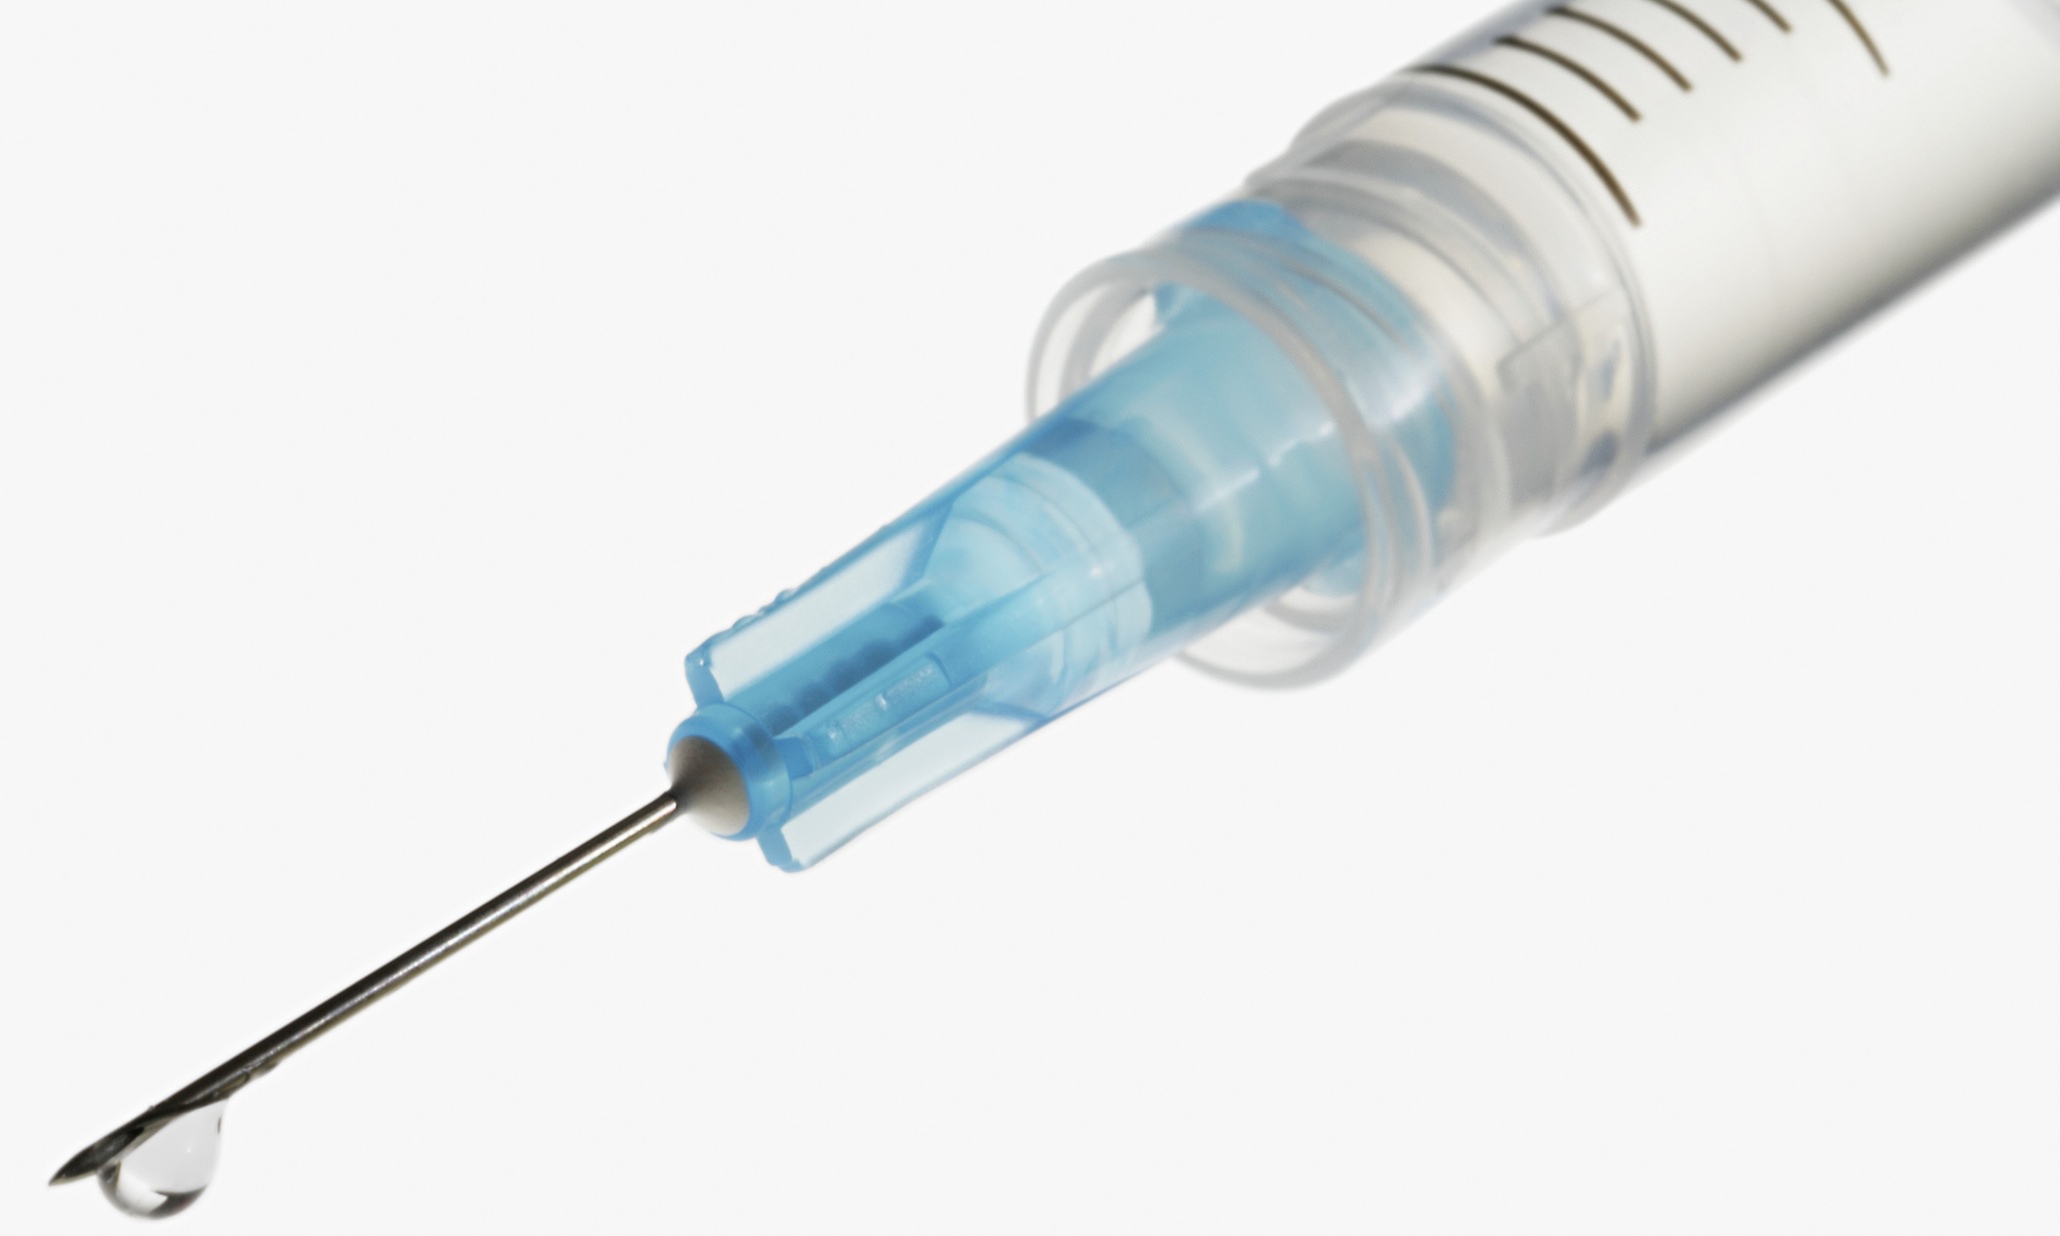 trans-life-injecting-t-is-a-tricky-business-when-you-can-t-get-a-needle-life-and-style